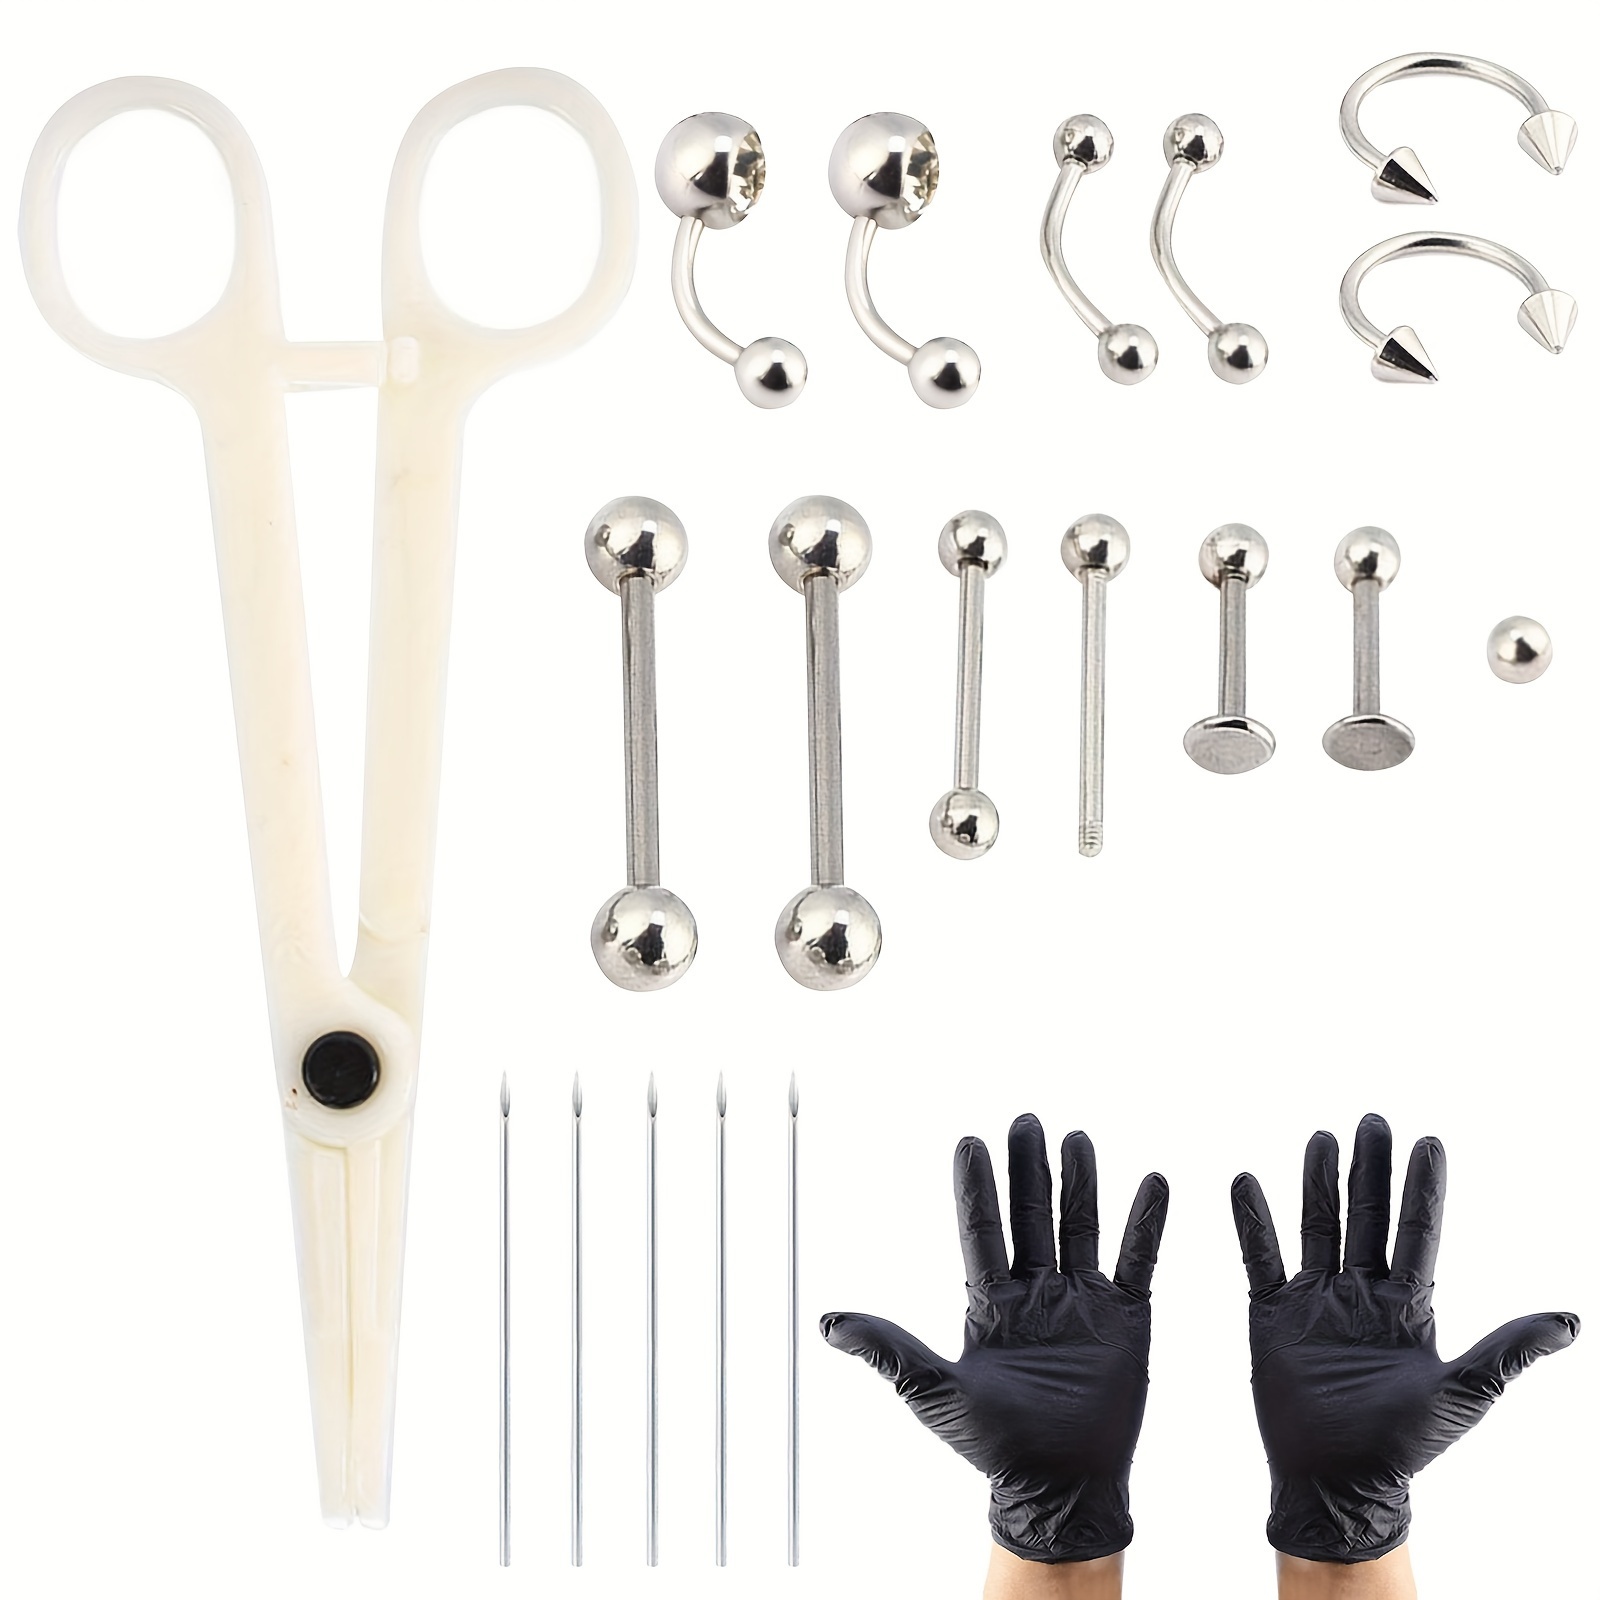 

Piercing Kit, 20pcs/set Tongue Nose Belly Button Body Jewelry Piercing Rings Tool Kit With 1 Piercing Clamp, 1 Pair Of Gloves, 5 Piercing Needles And 6 Pairs Of Piercing Rings